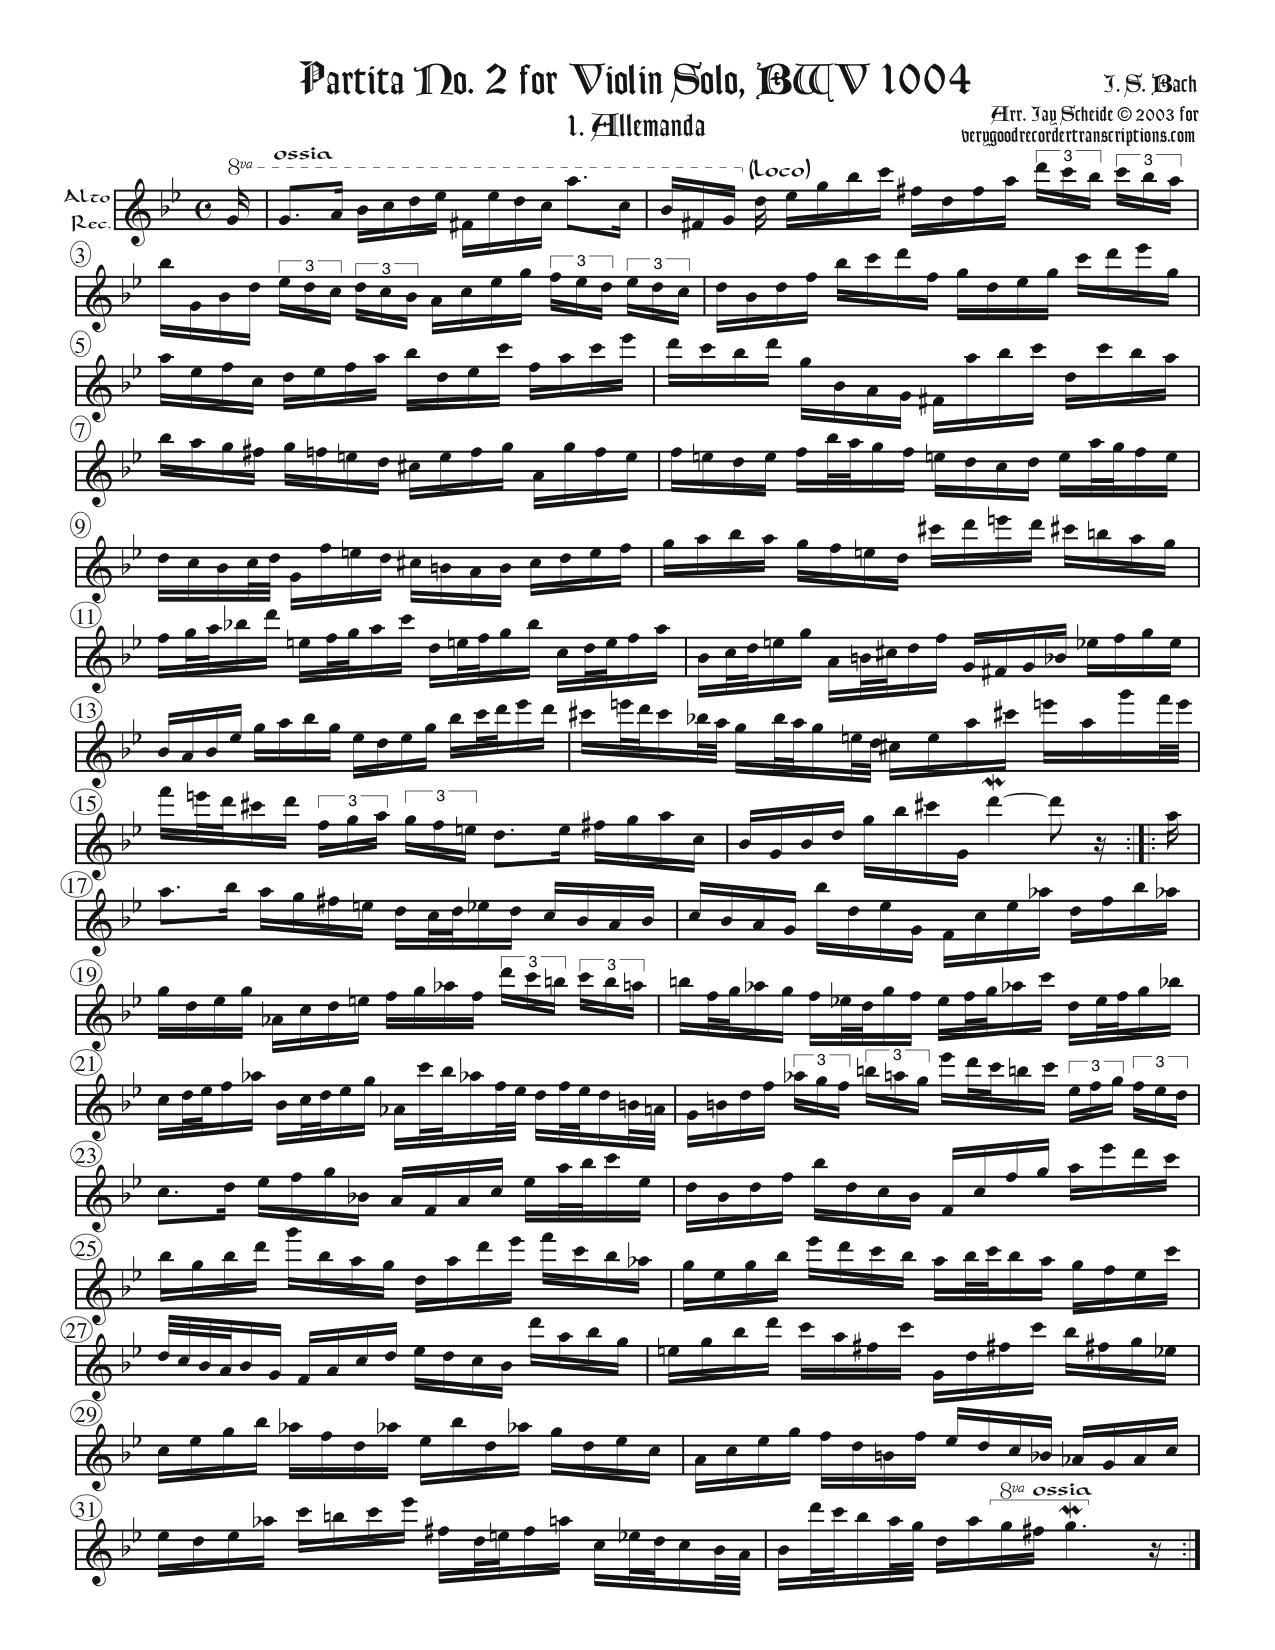 First Four Movements from Partita No. 2, BWV 1004